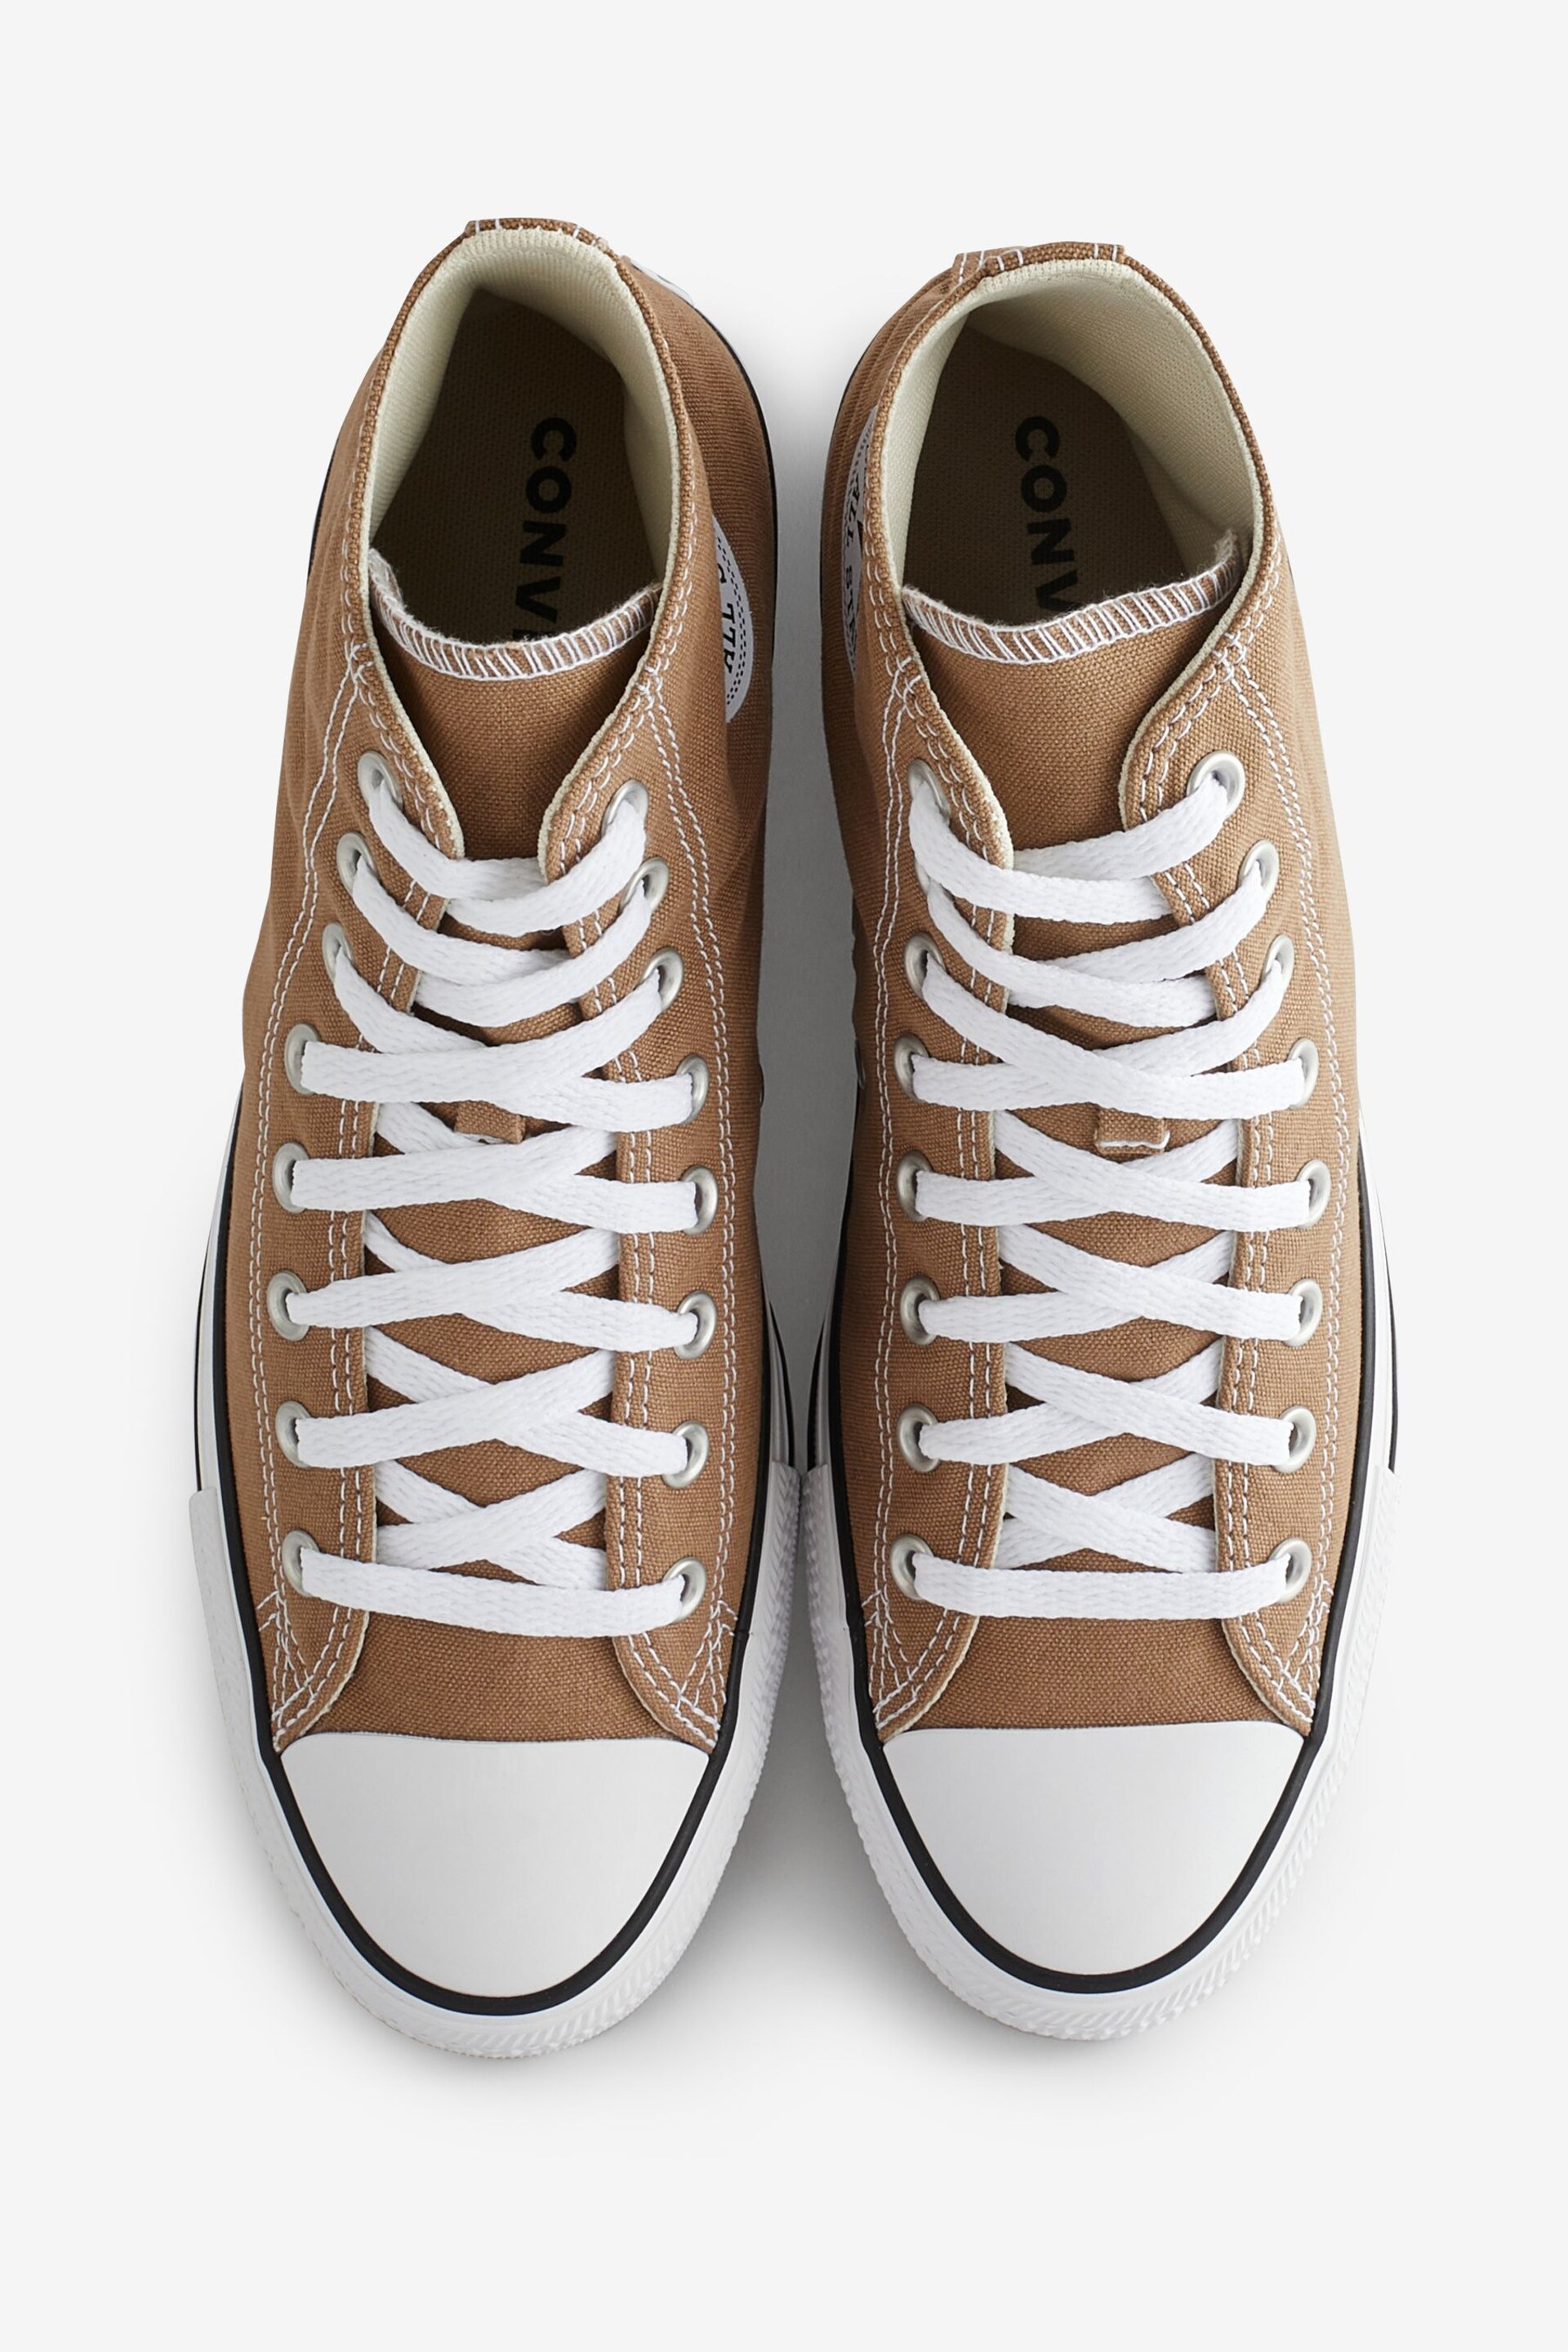 Converse Brown Chuck Taylor Classic High Top Trainers - Image 5 of 9